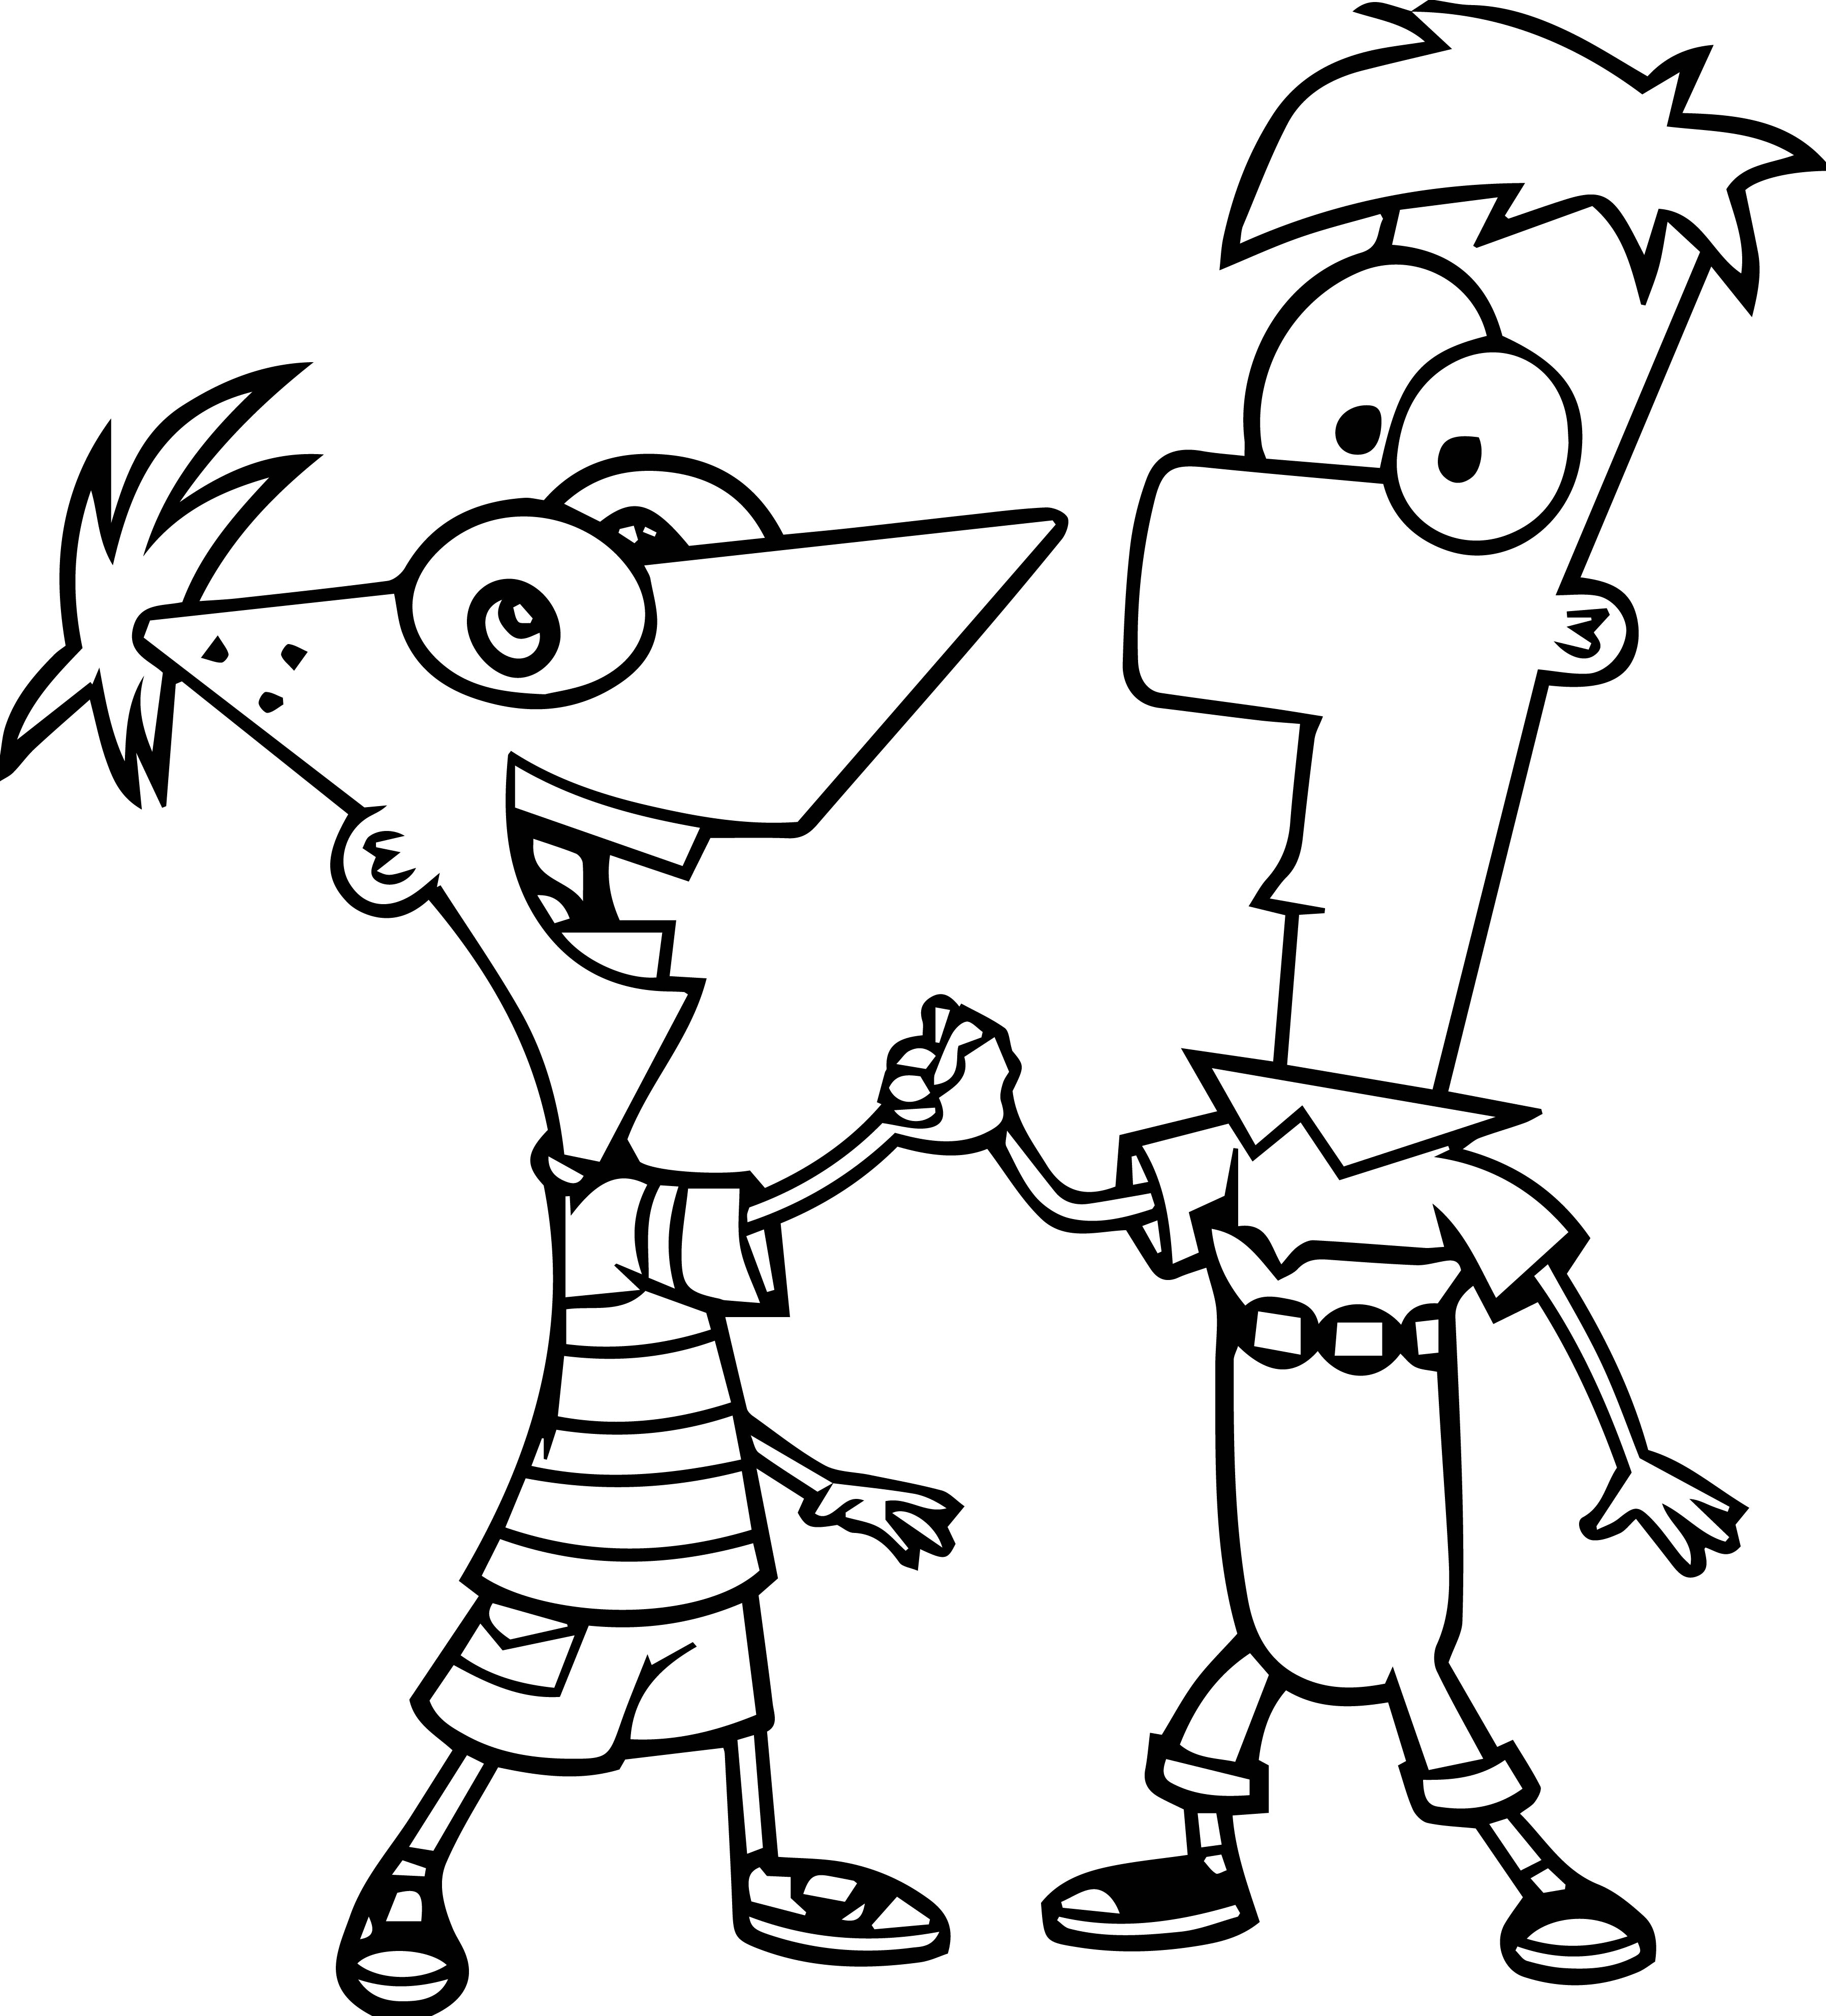 Phineas And Ferb Coloring Pages To Print at GetDrawings | Free download